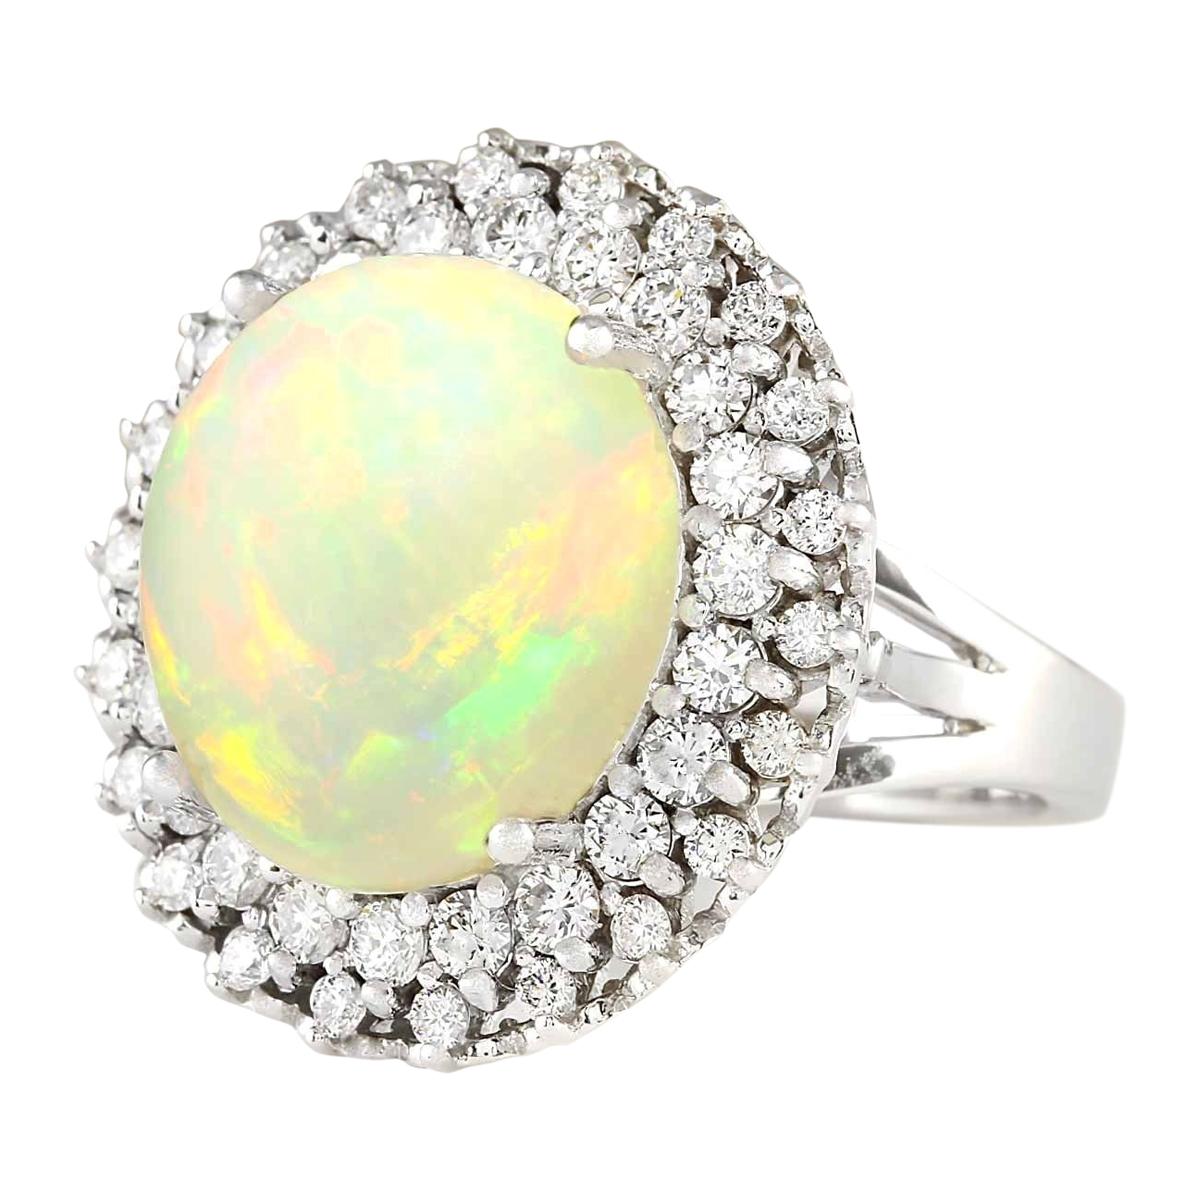 11.59 Carat Opal 14 Karat White Gold Diamond Ring
Stamped: 14K White Gold
Total Ring Weight: 12.1 Grams
Total  Opal Weight is 10.14 Carat (Measures: 16.00x14.00 mm)
Color: Multicolor
Total  Diamond Weight is 1.45 Carat
Color: F-G, Clarity: